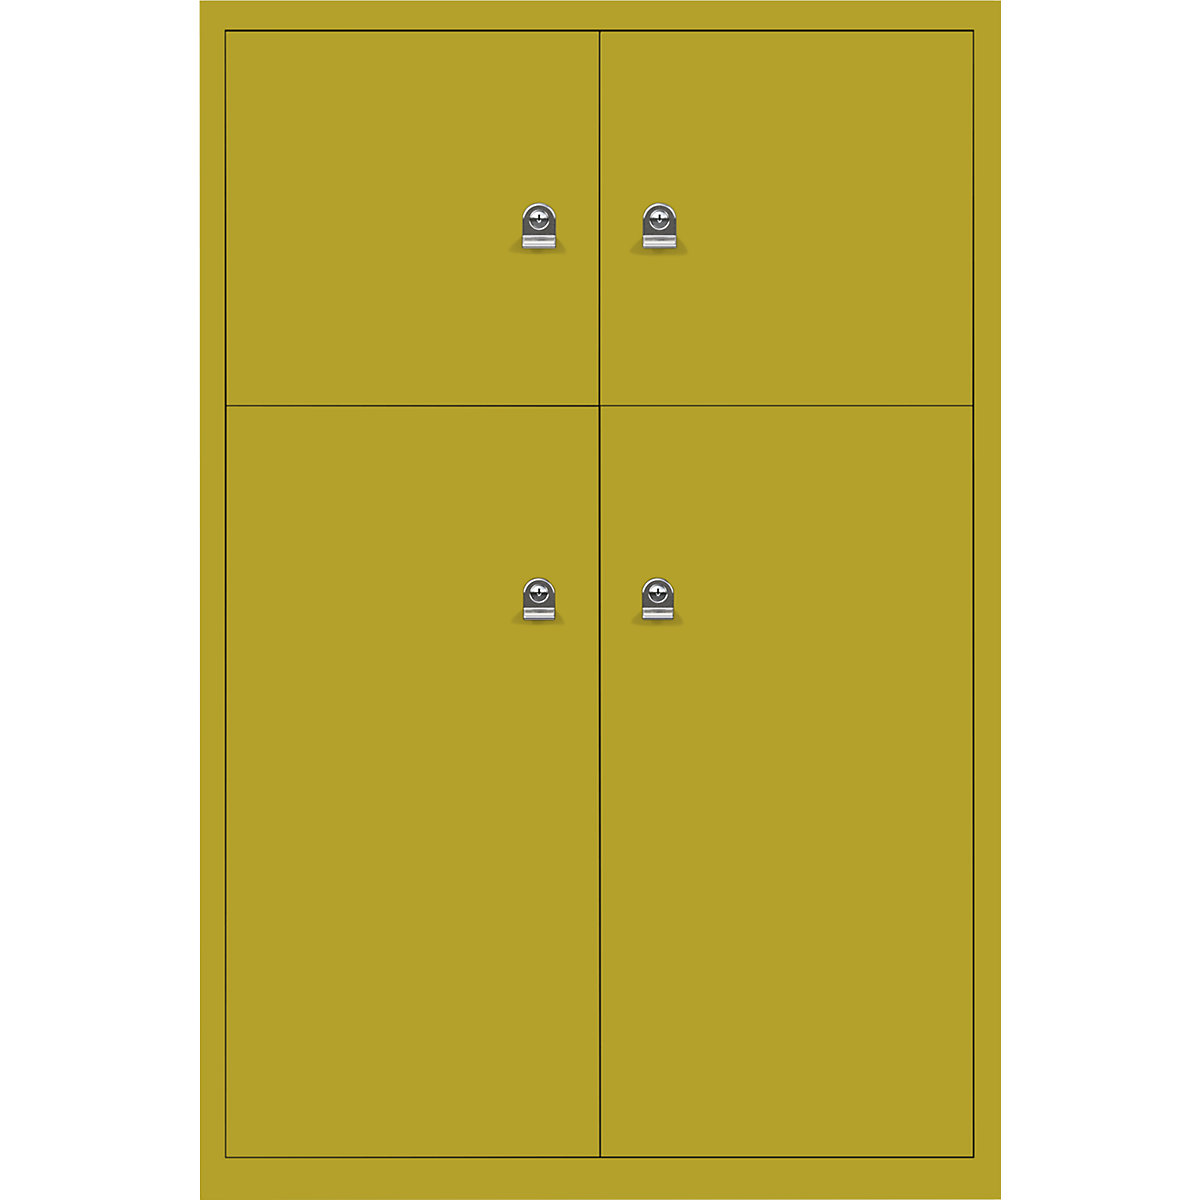 BISLEY – LateralFile™ lodge, with 4 lockable compartments, height 2 x 375 mm, 2 x 755 mm, tickleweed